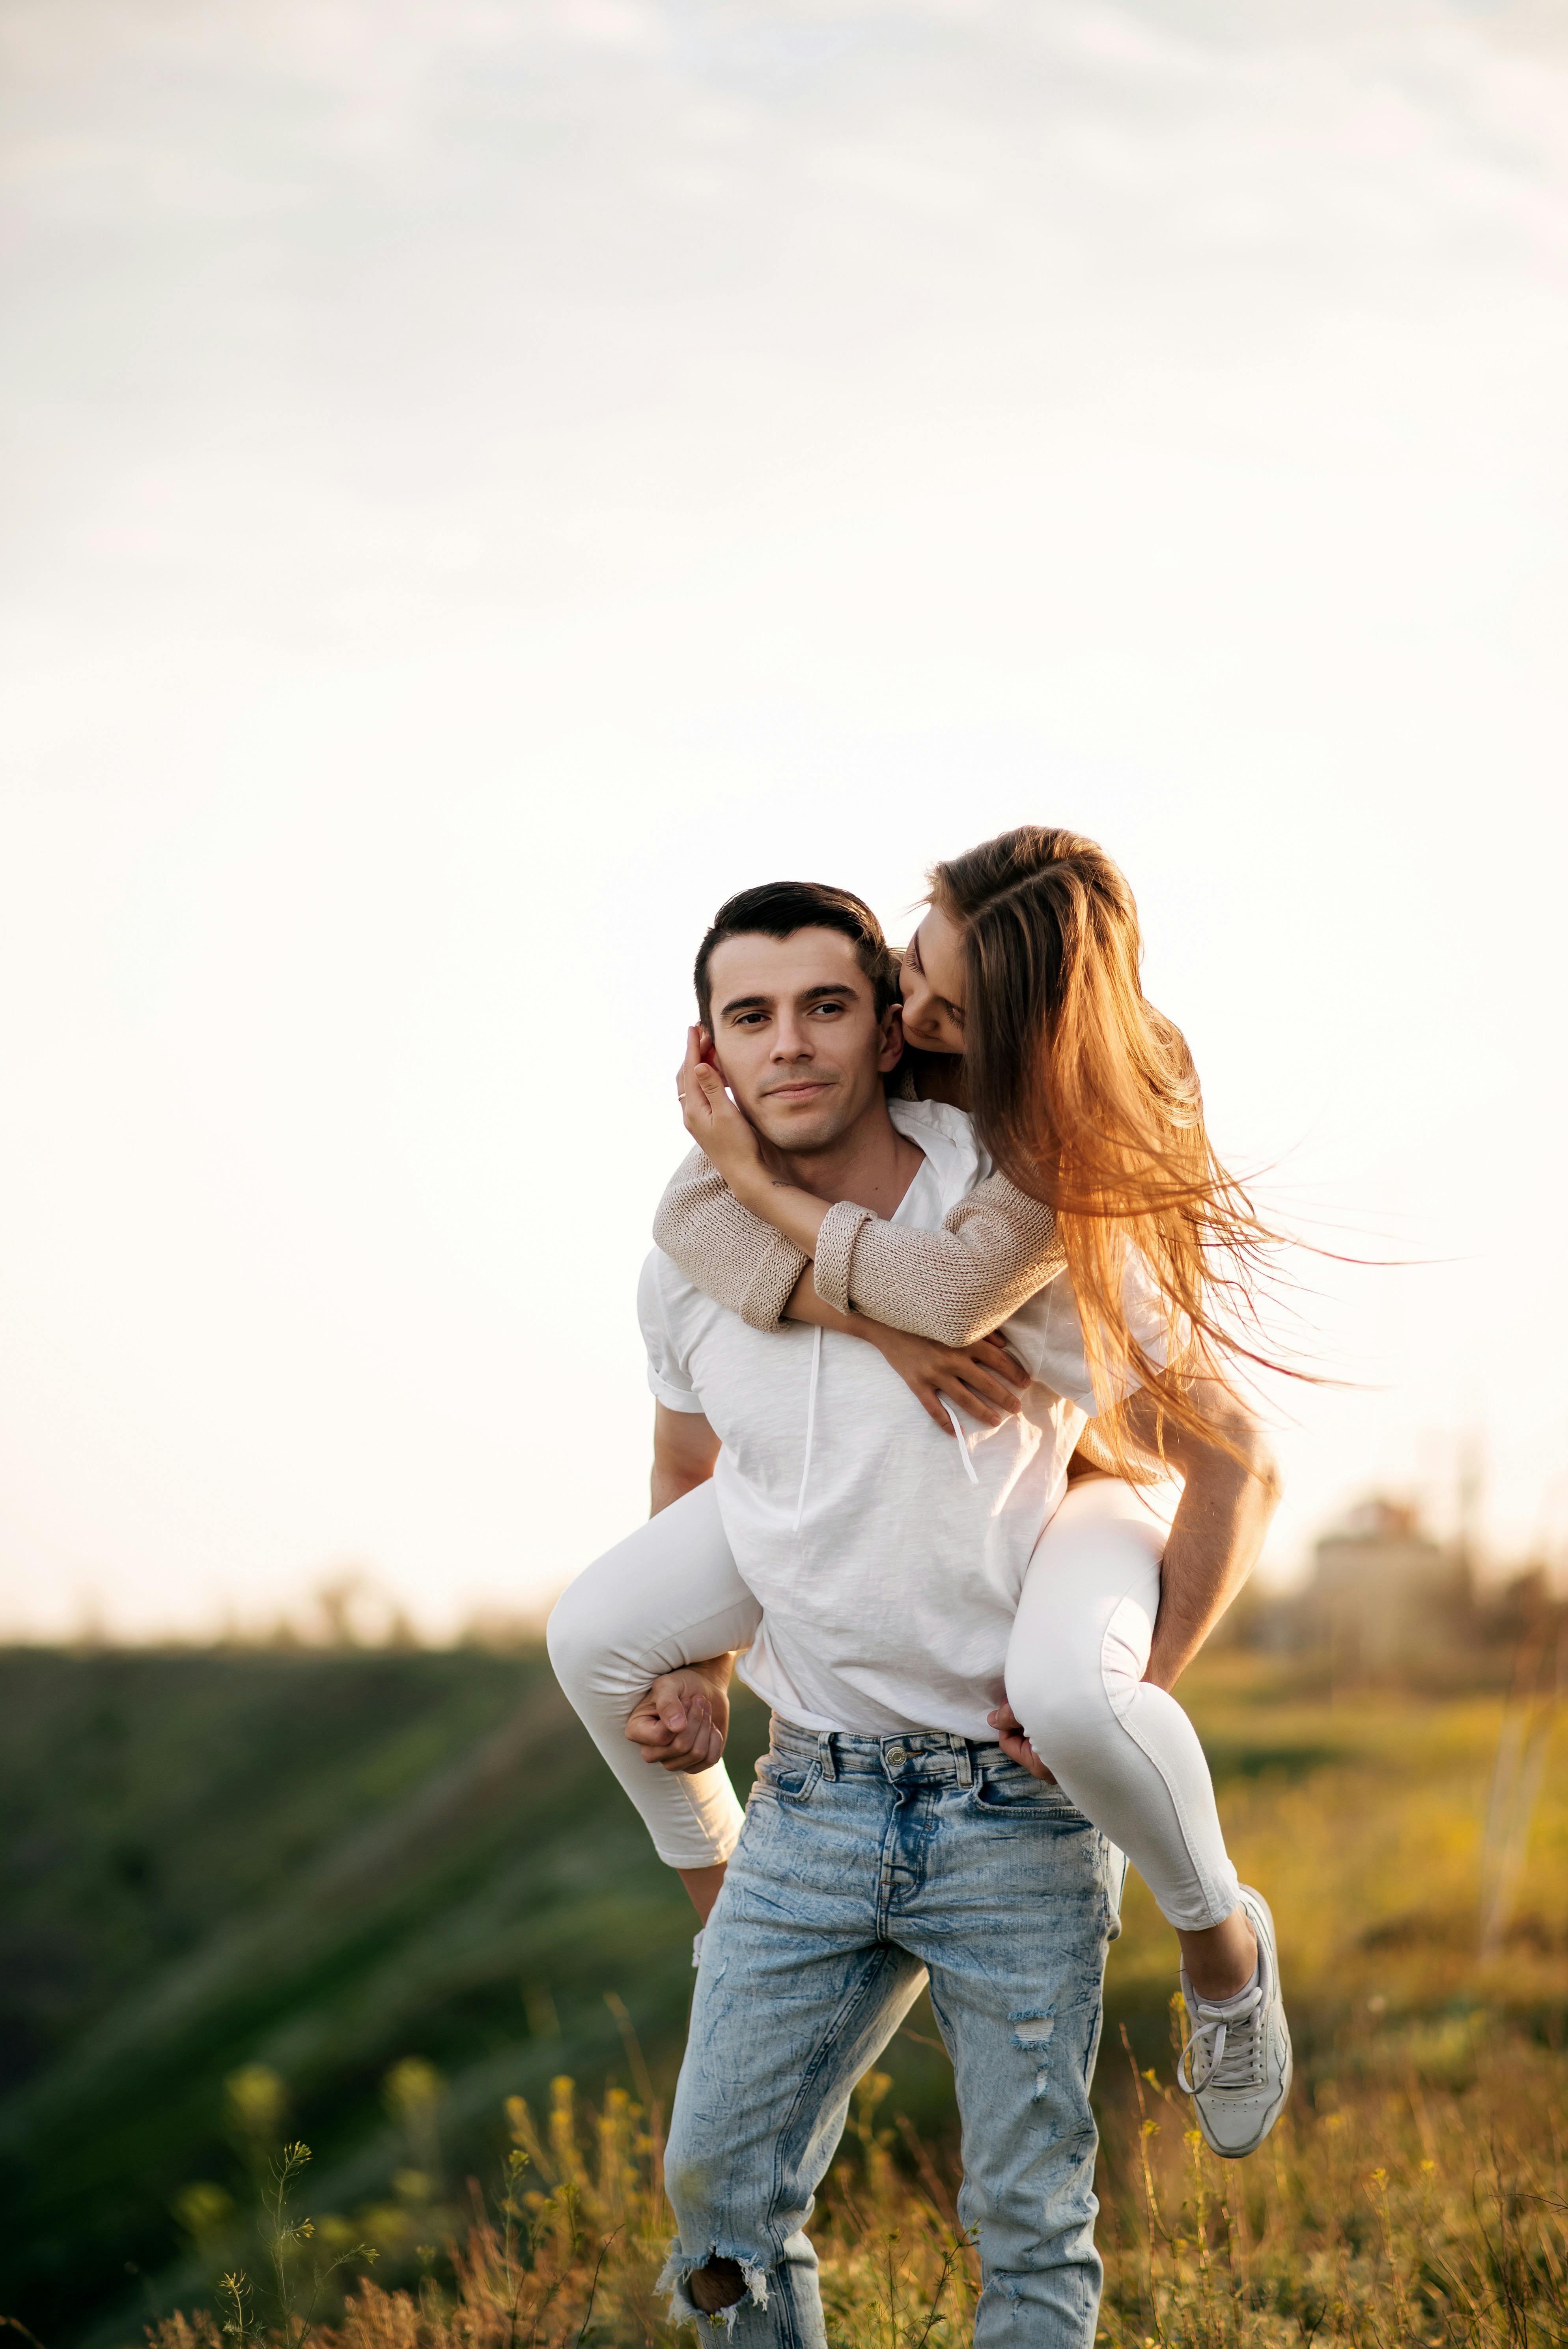 A photographer's guide to posing couples | Unscripted Photographers